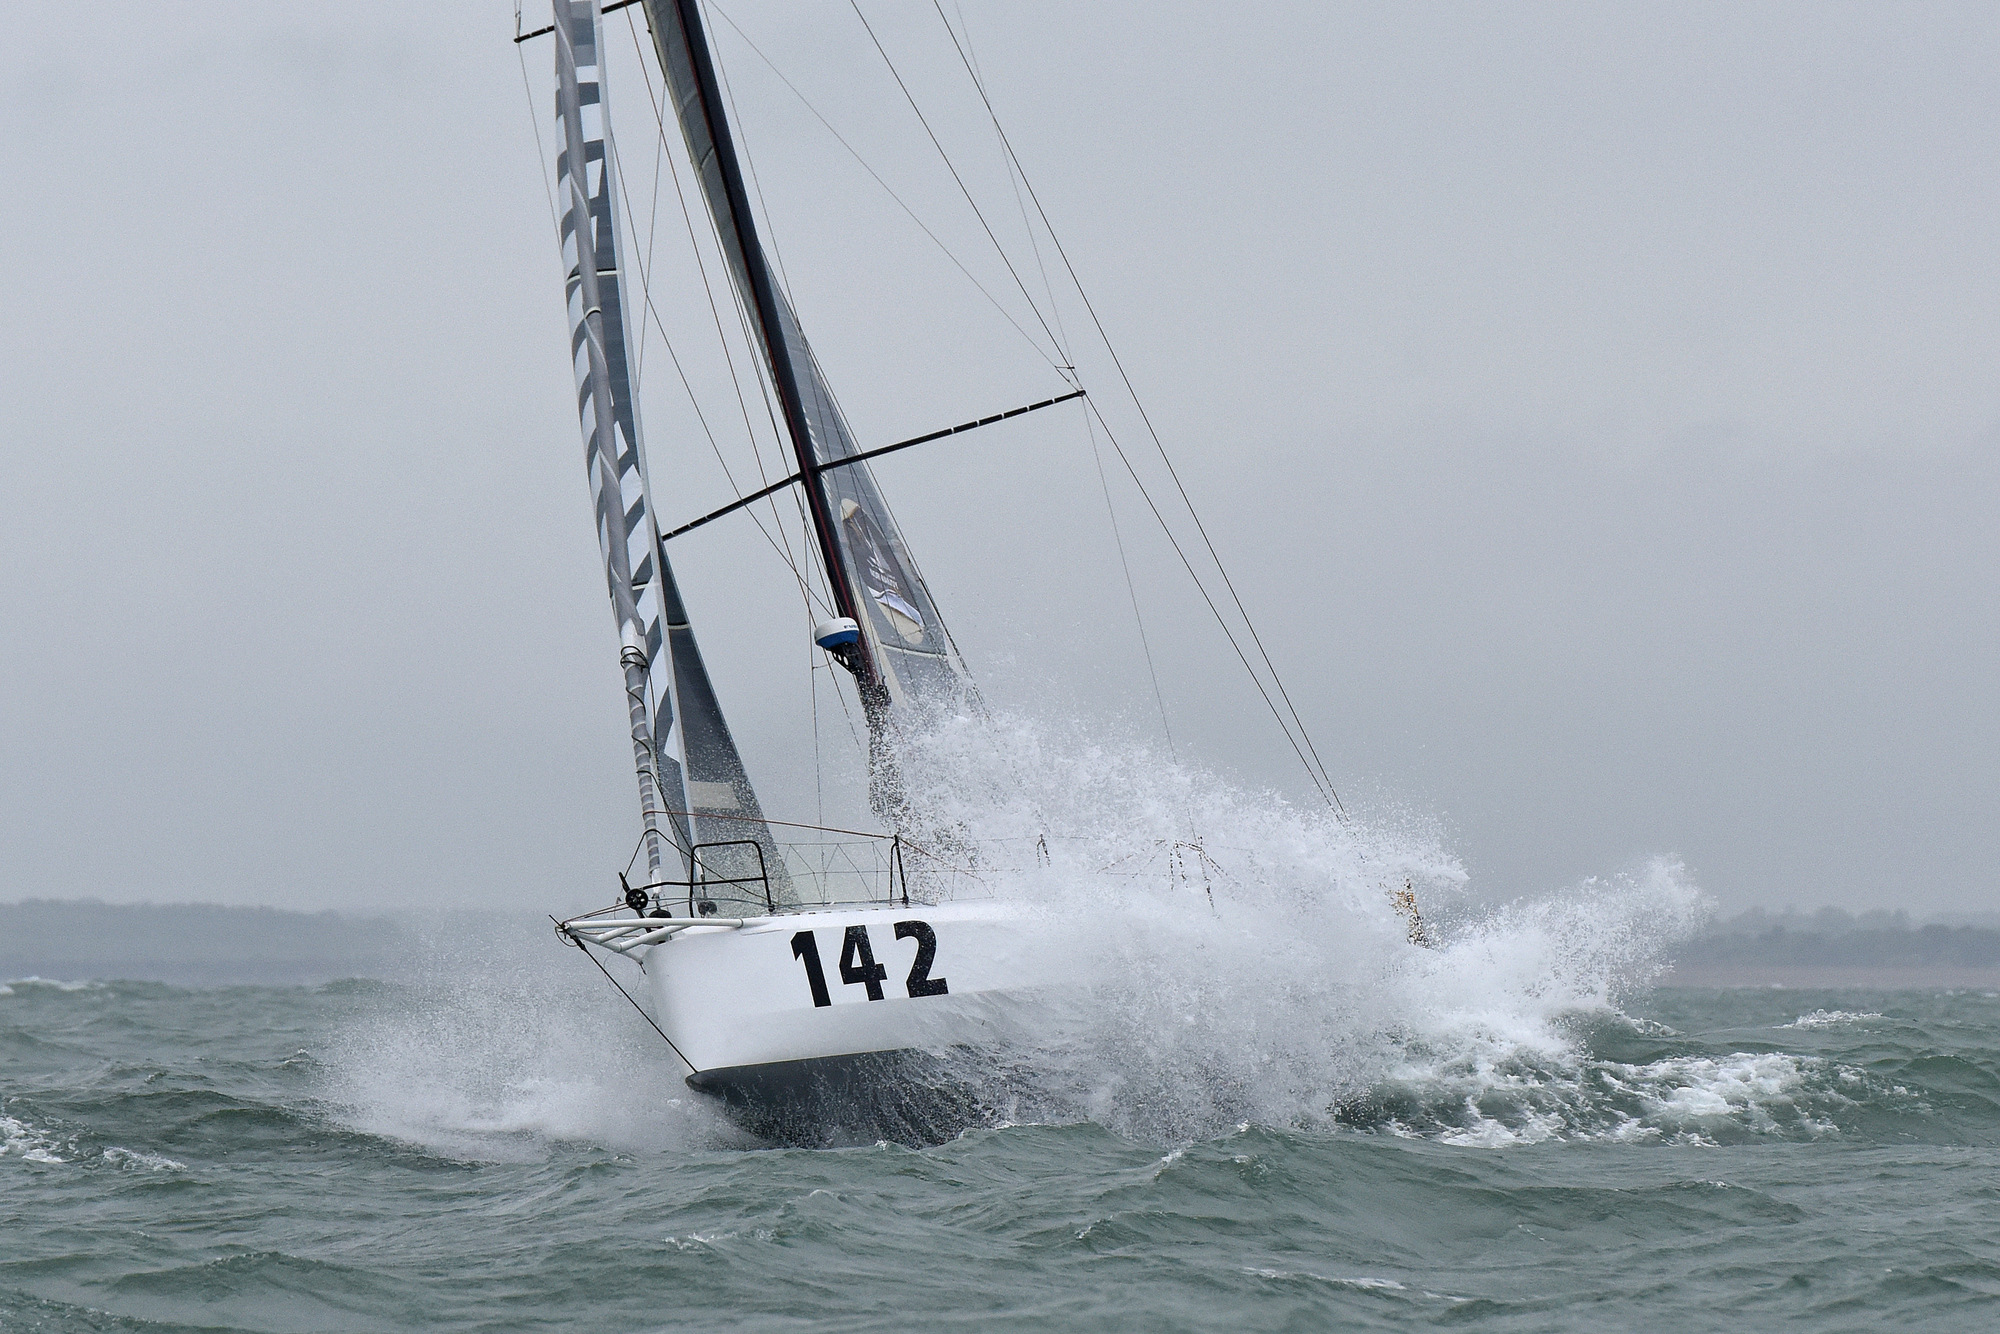  Class 40  Normandy Channel Race  Caen FRA  Day 5